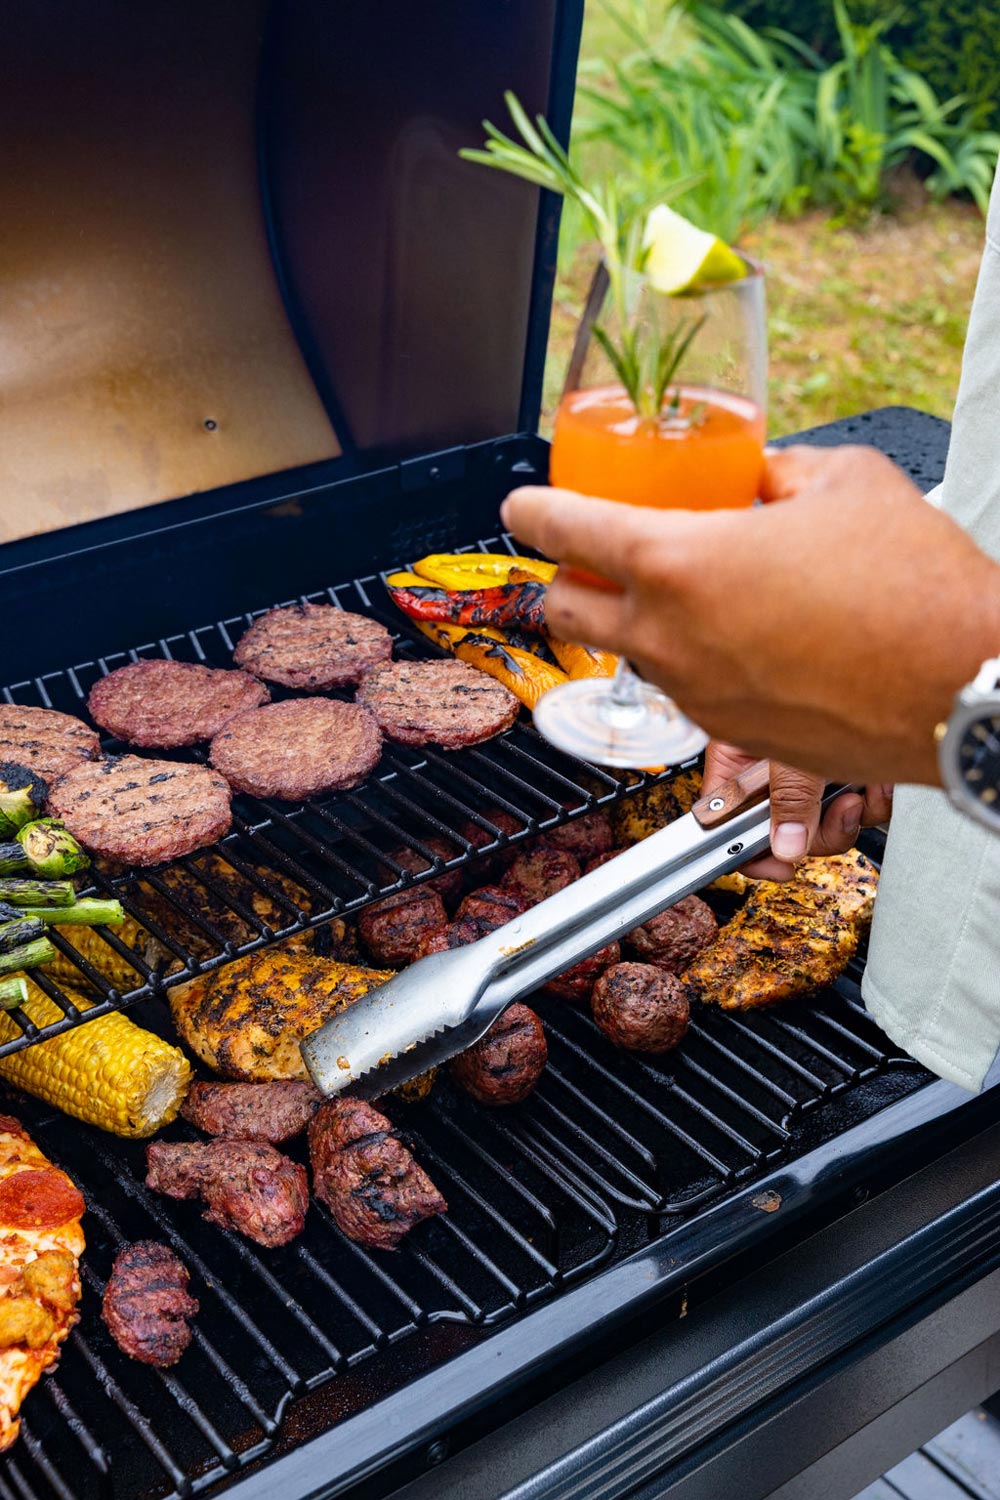 A person holding a mocktail while grilling a variety of foods.